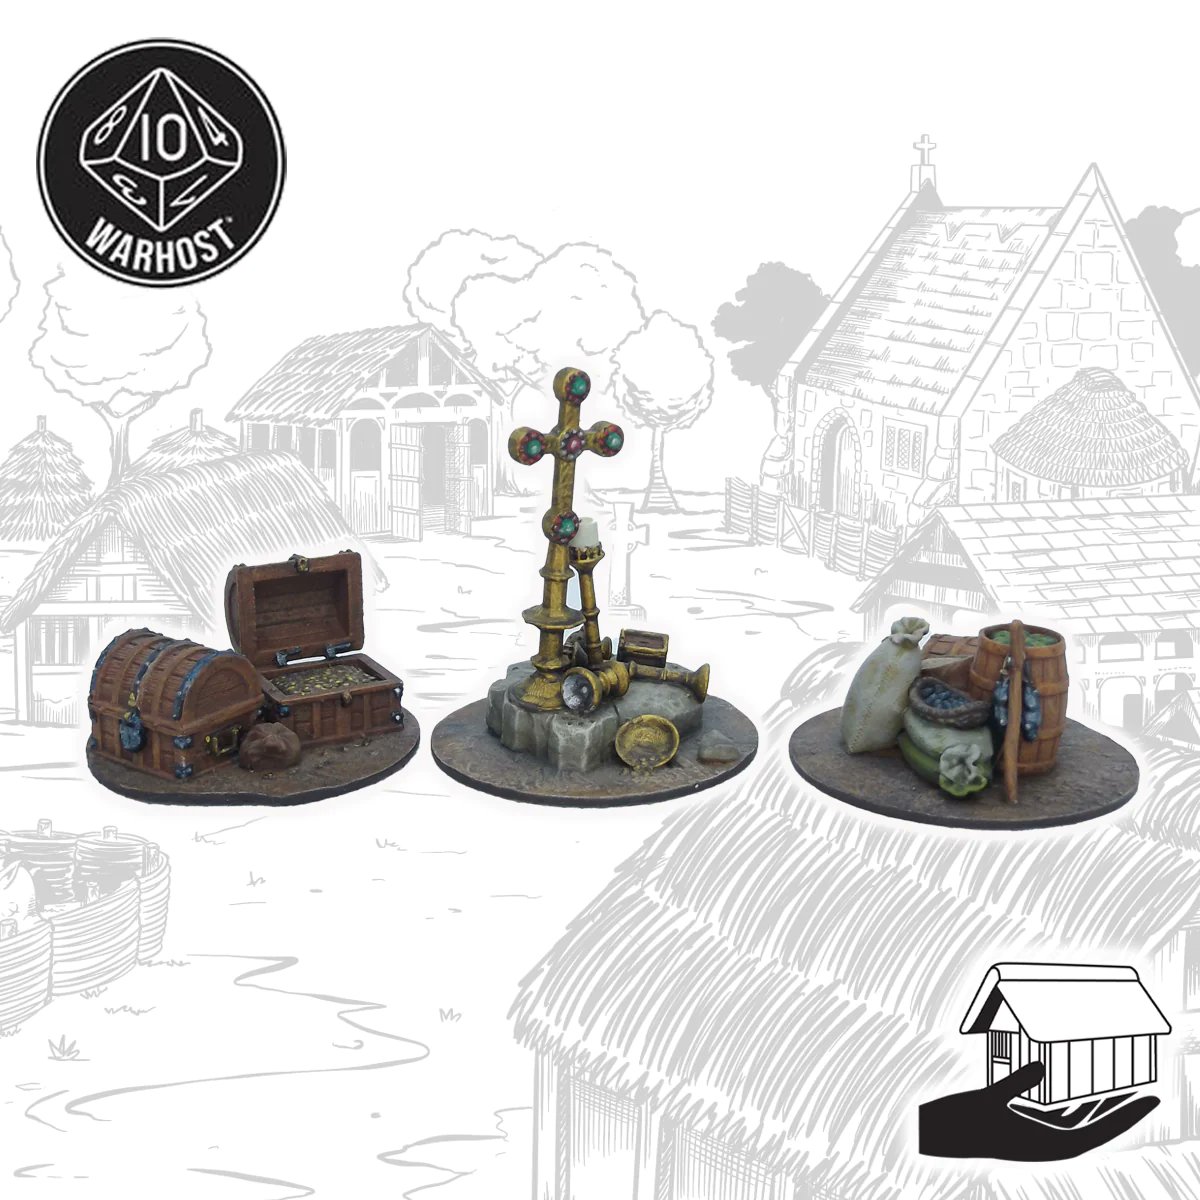 •Objectives - Treasure•
This is the good stuff, easy to carry and worth something
rebrand.ly/djzenfz
#BaronsWar #Medieval #13thCentury #Outremer #footsore #footsoreminiatures #SPG #wargaming #warmongers #gaming #minwargaming #tabletopgames #miniatures #figures